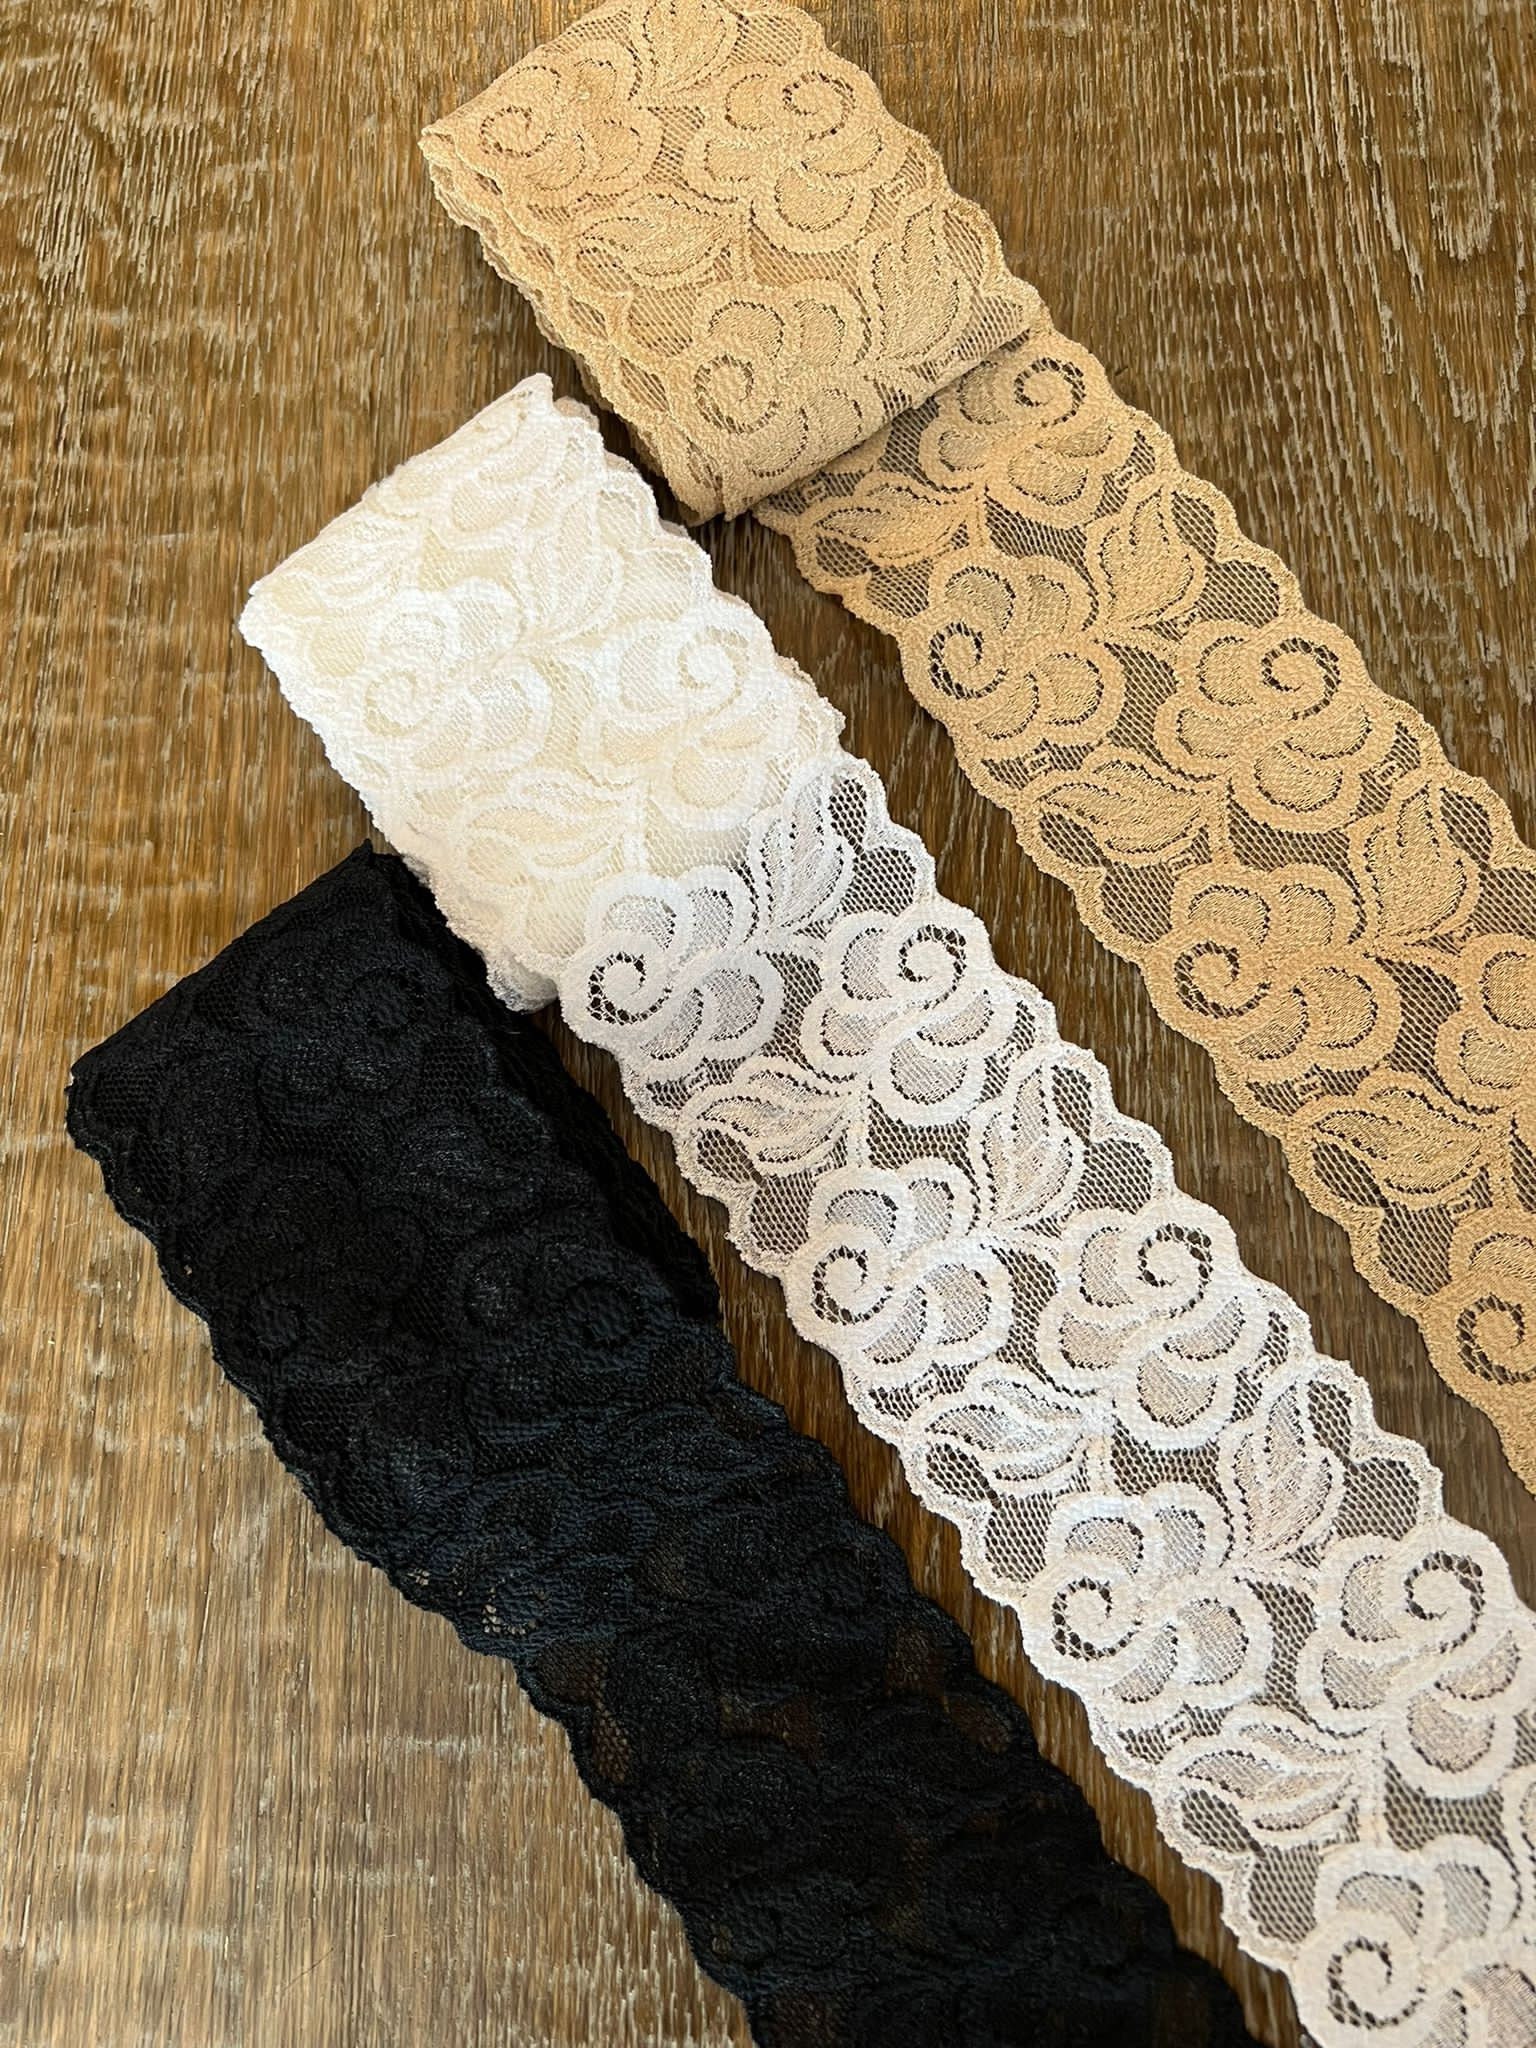 2.4 inch White Lace Ribbon,Sewing Lace Trim, Elastic Stretchy Lace Fabric - 5 Yard,Perfect for Crafting,Sewing Making,Gift Wrapping and Bridal